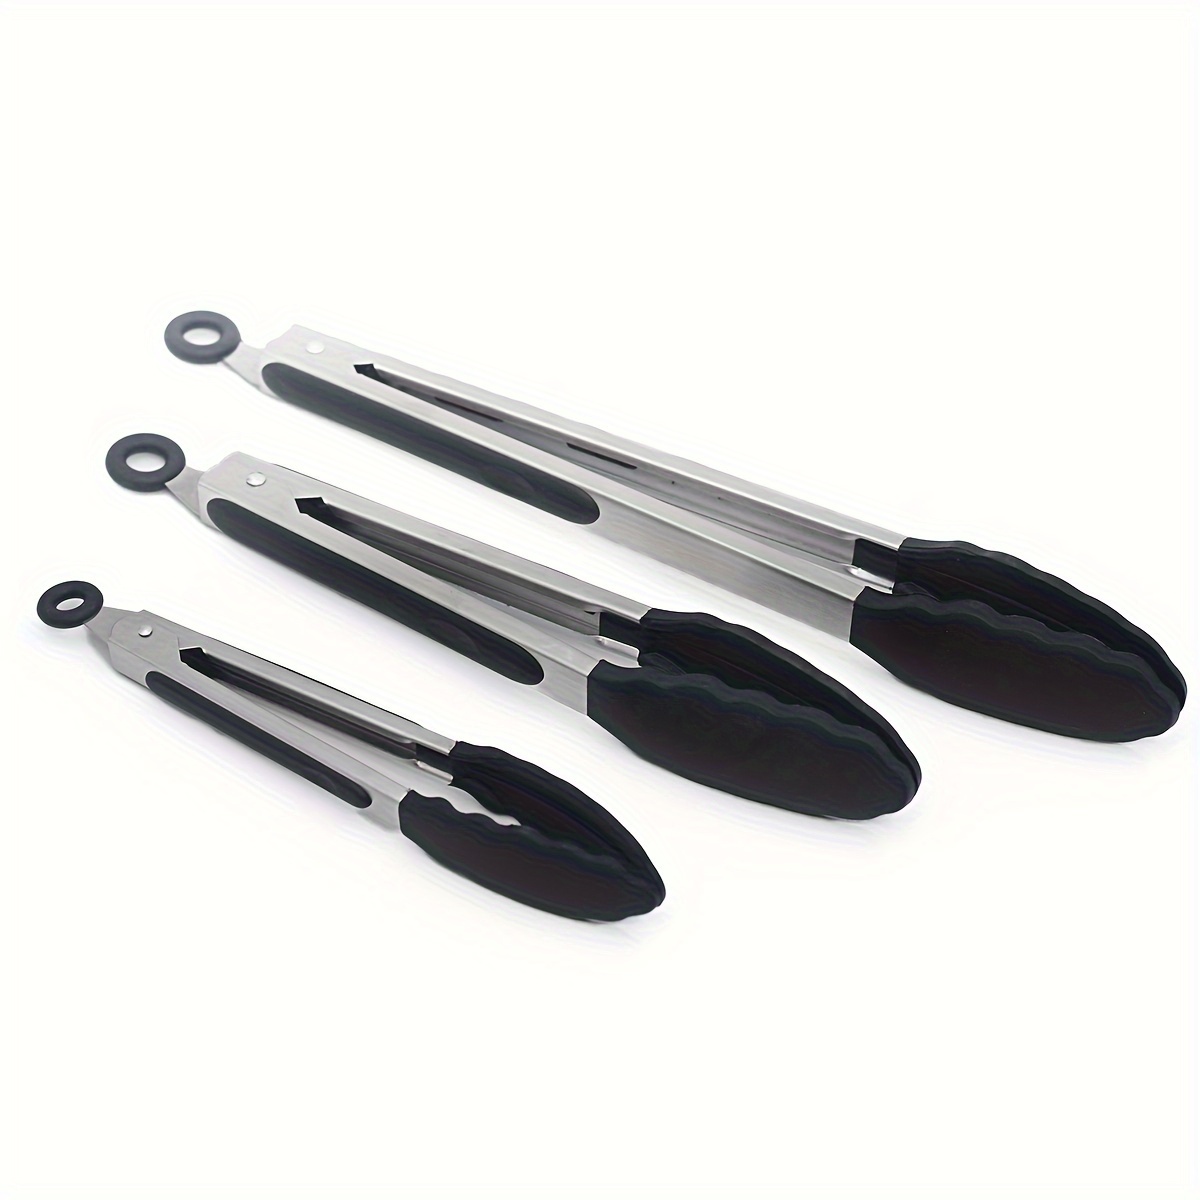 9 Premium Stainless Steel Kitchen Tongs with Silicone Tips